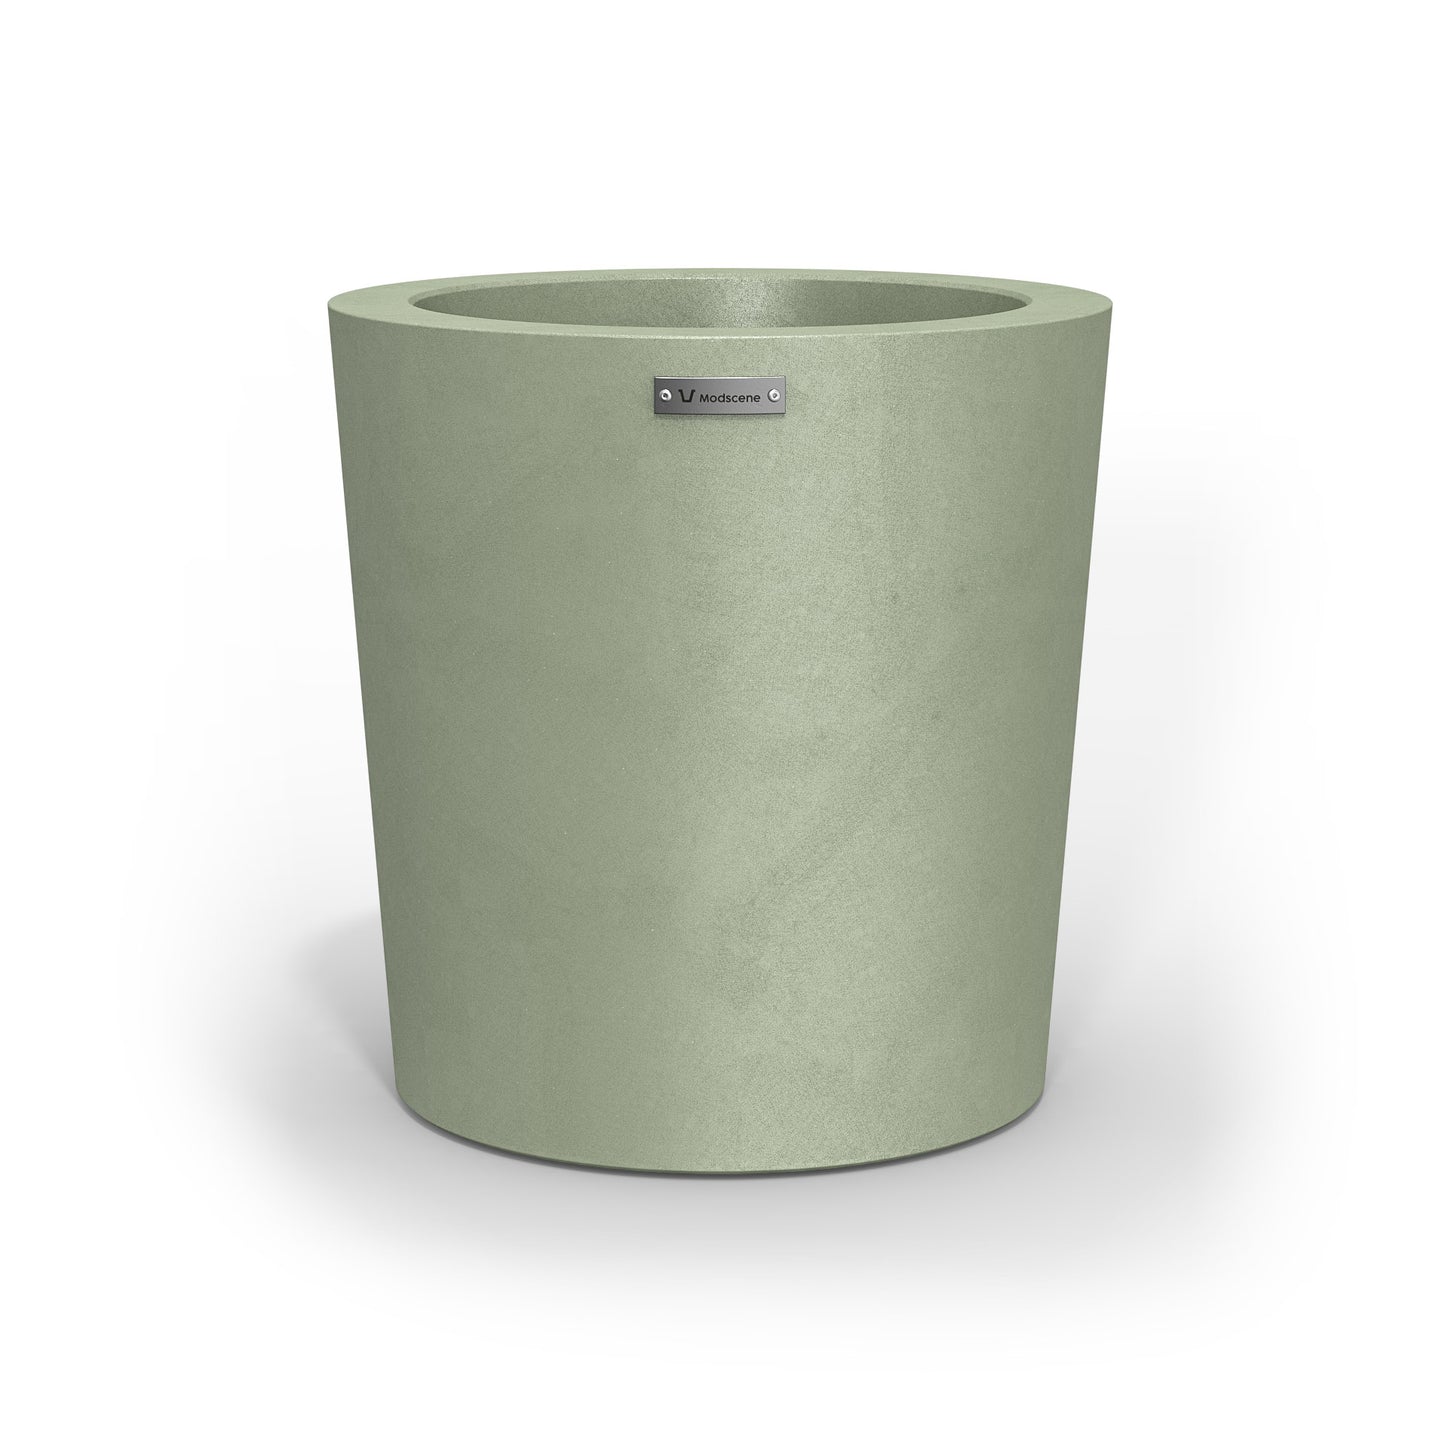 A modern style planter pot in a pastel green colour. Made by Modscene NZ.